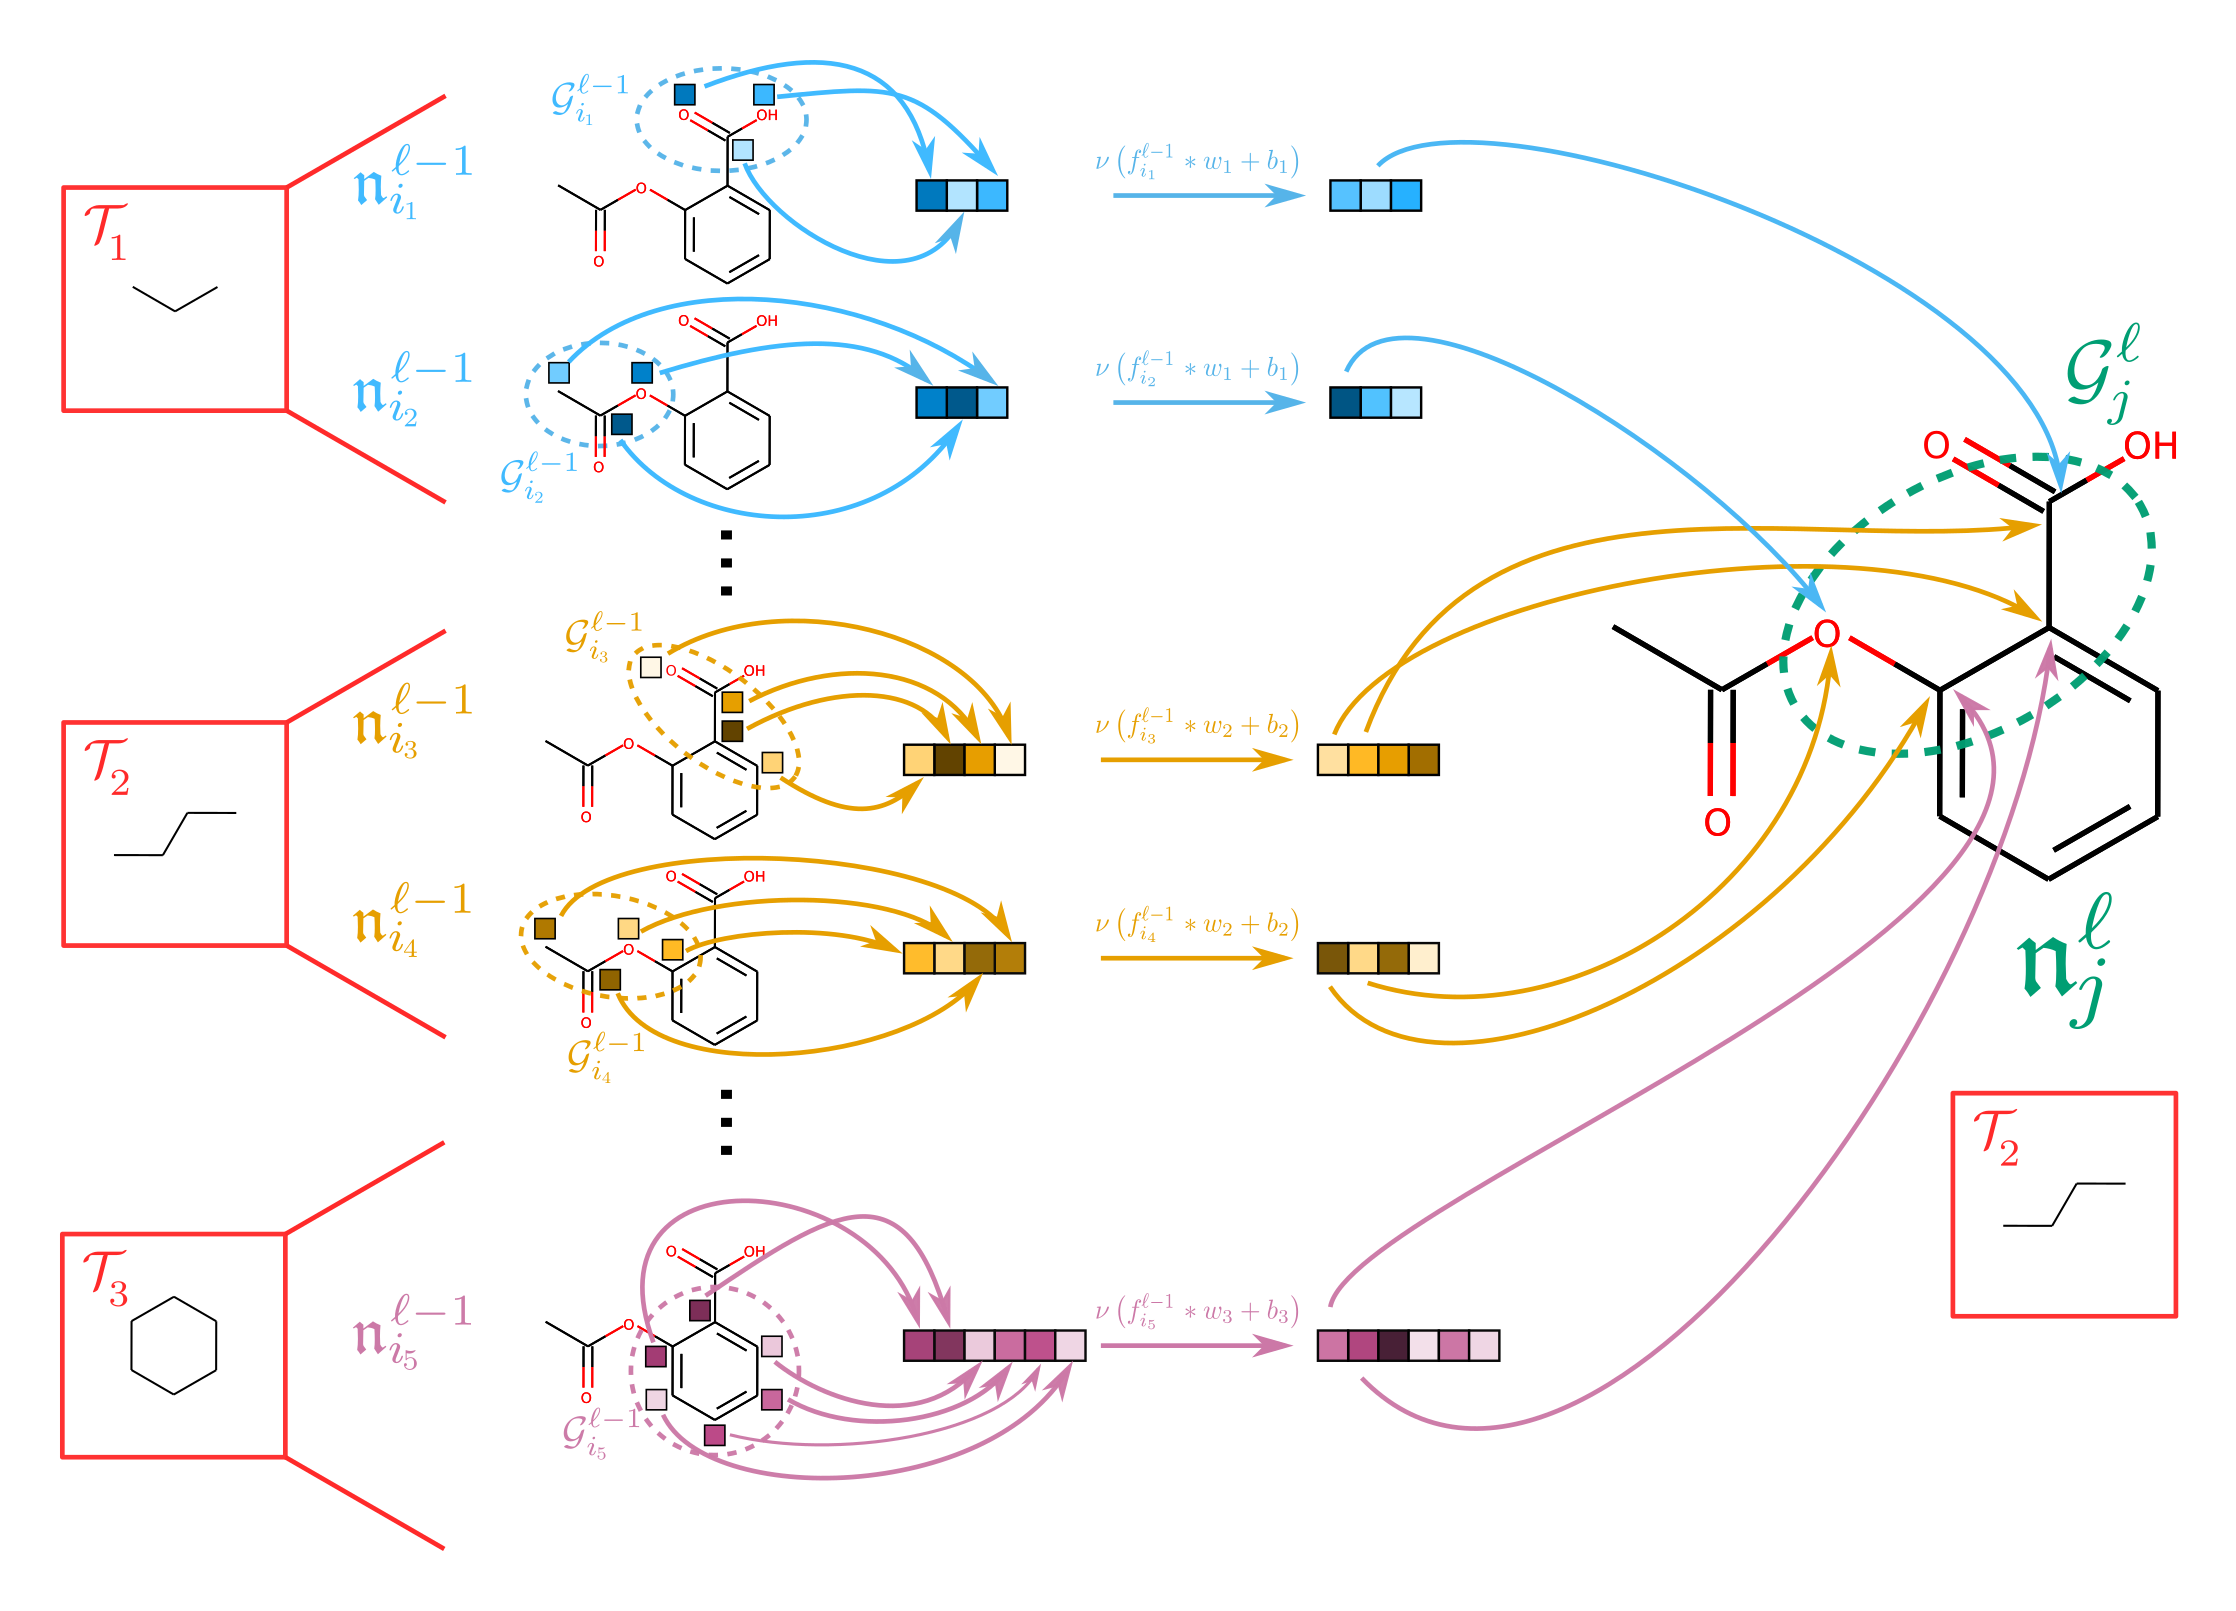 Diagram depicting the action of a single layer in the Autobahn neural network architecture.